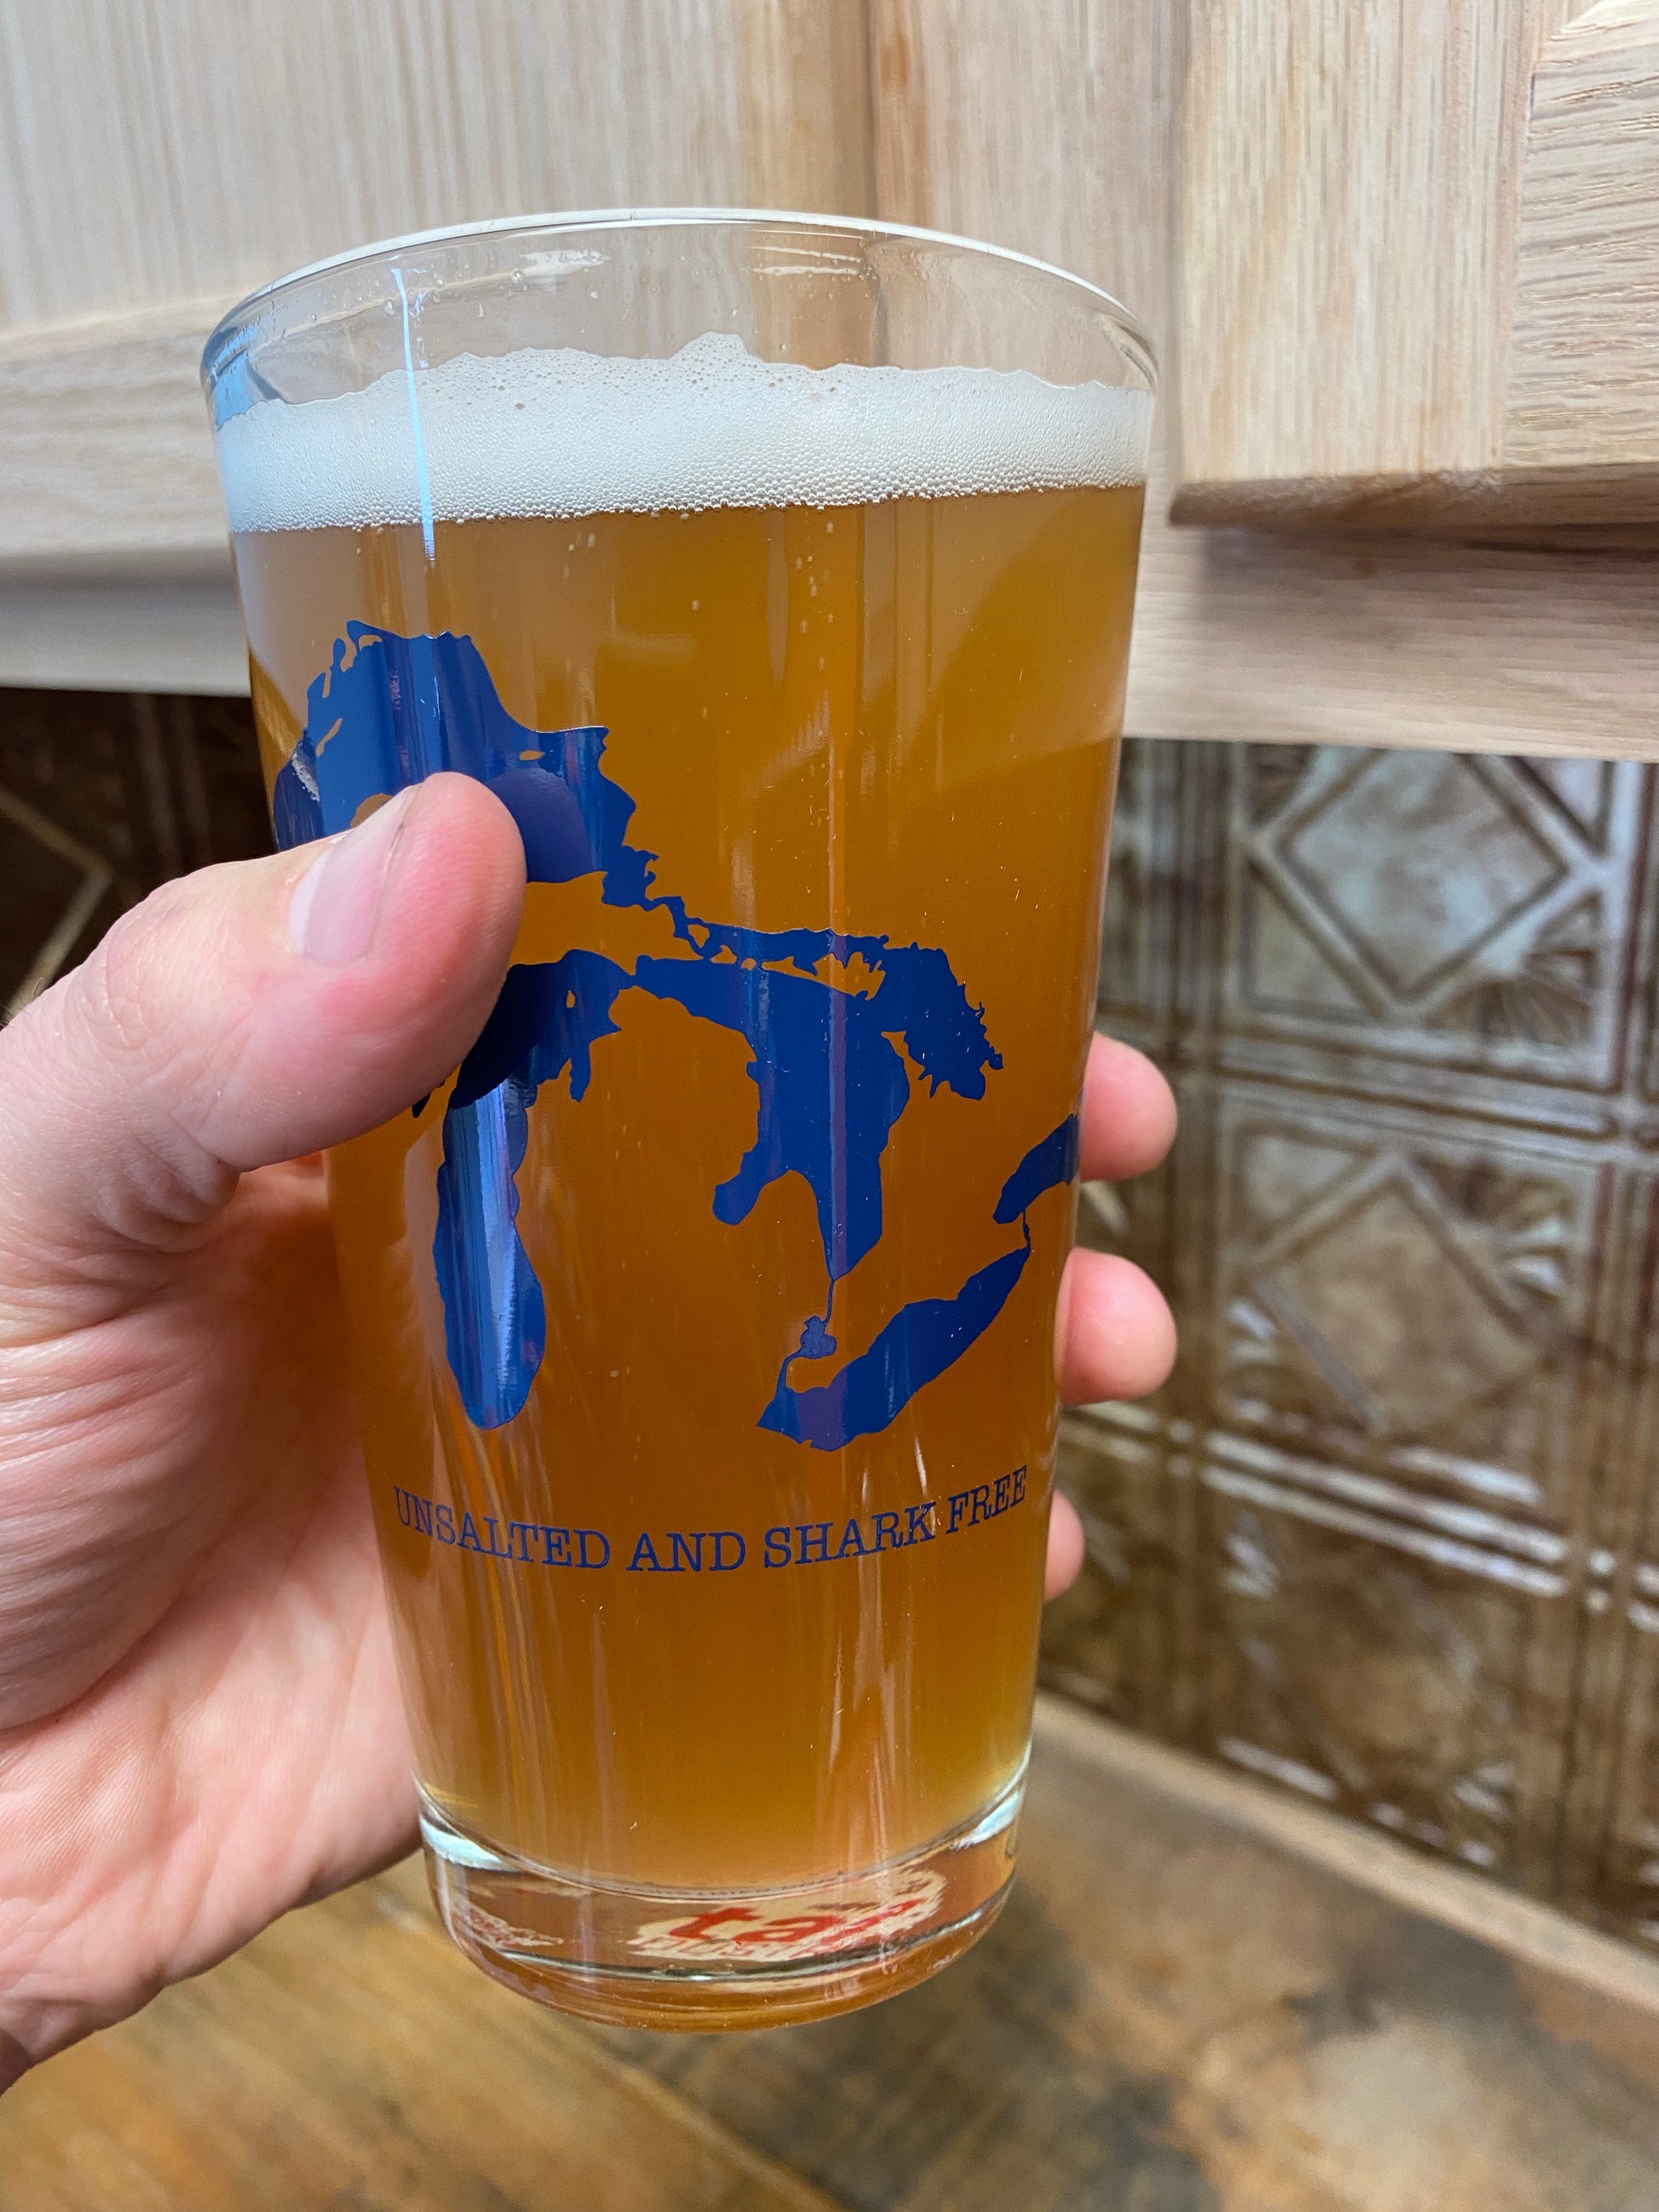 Great Lakes unsalted and shark free glass pint